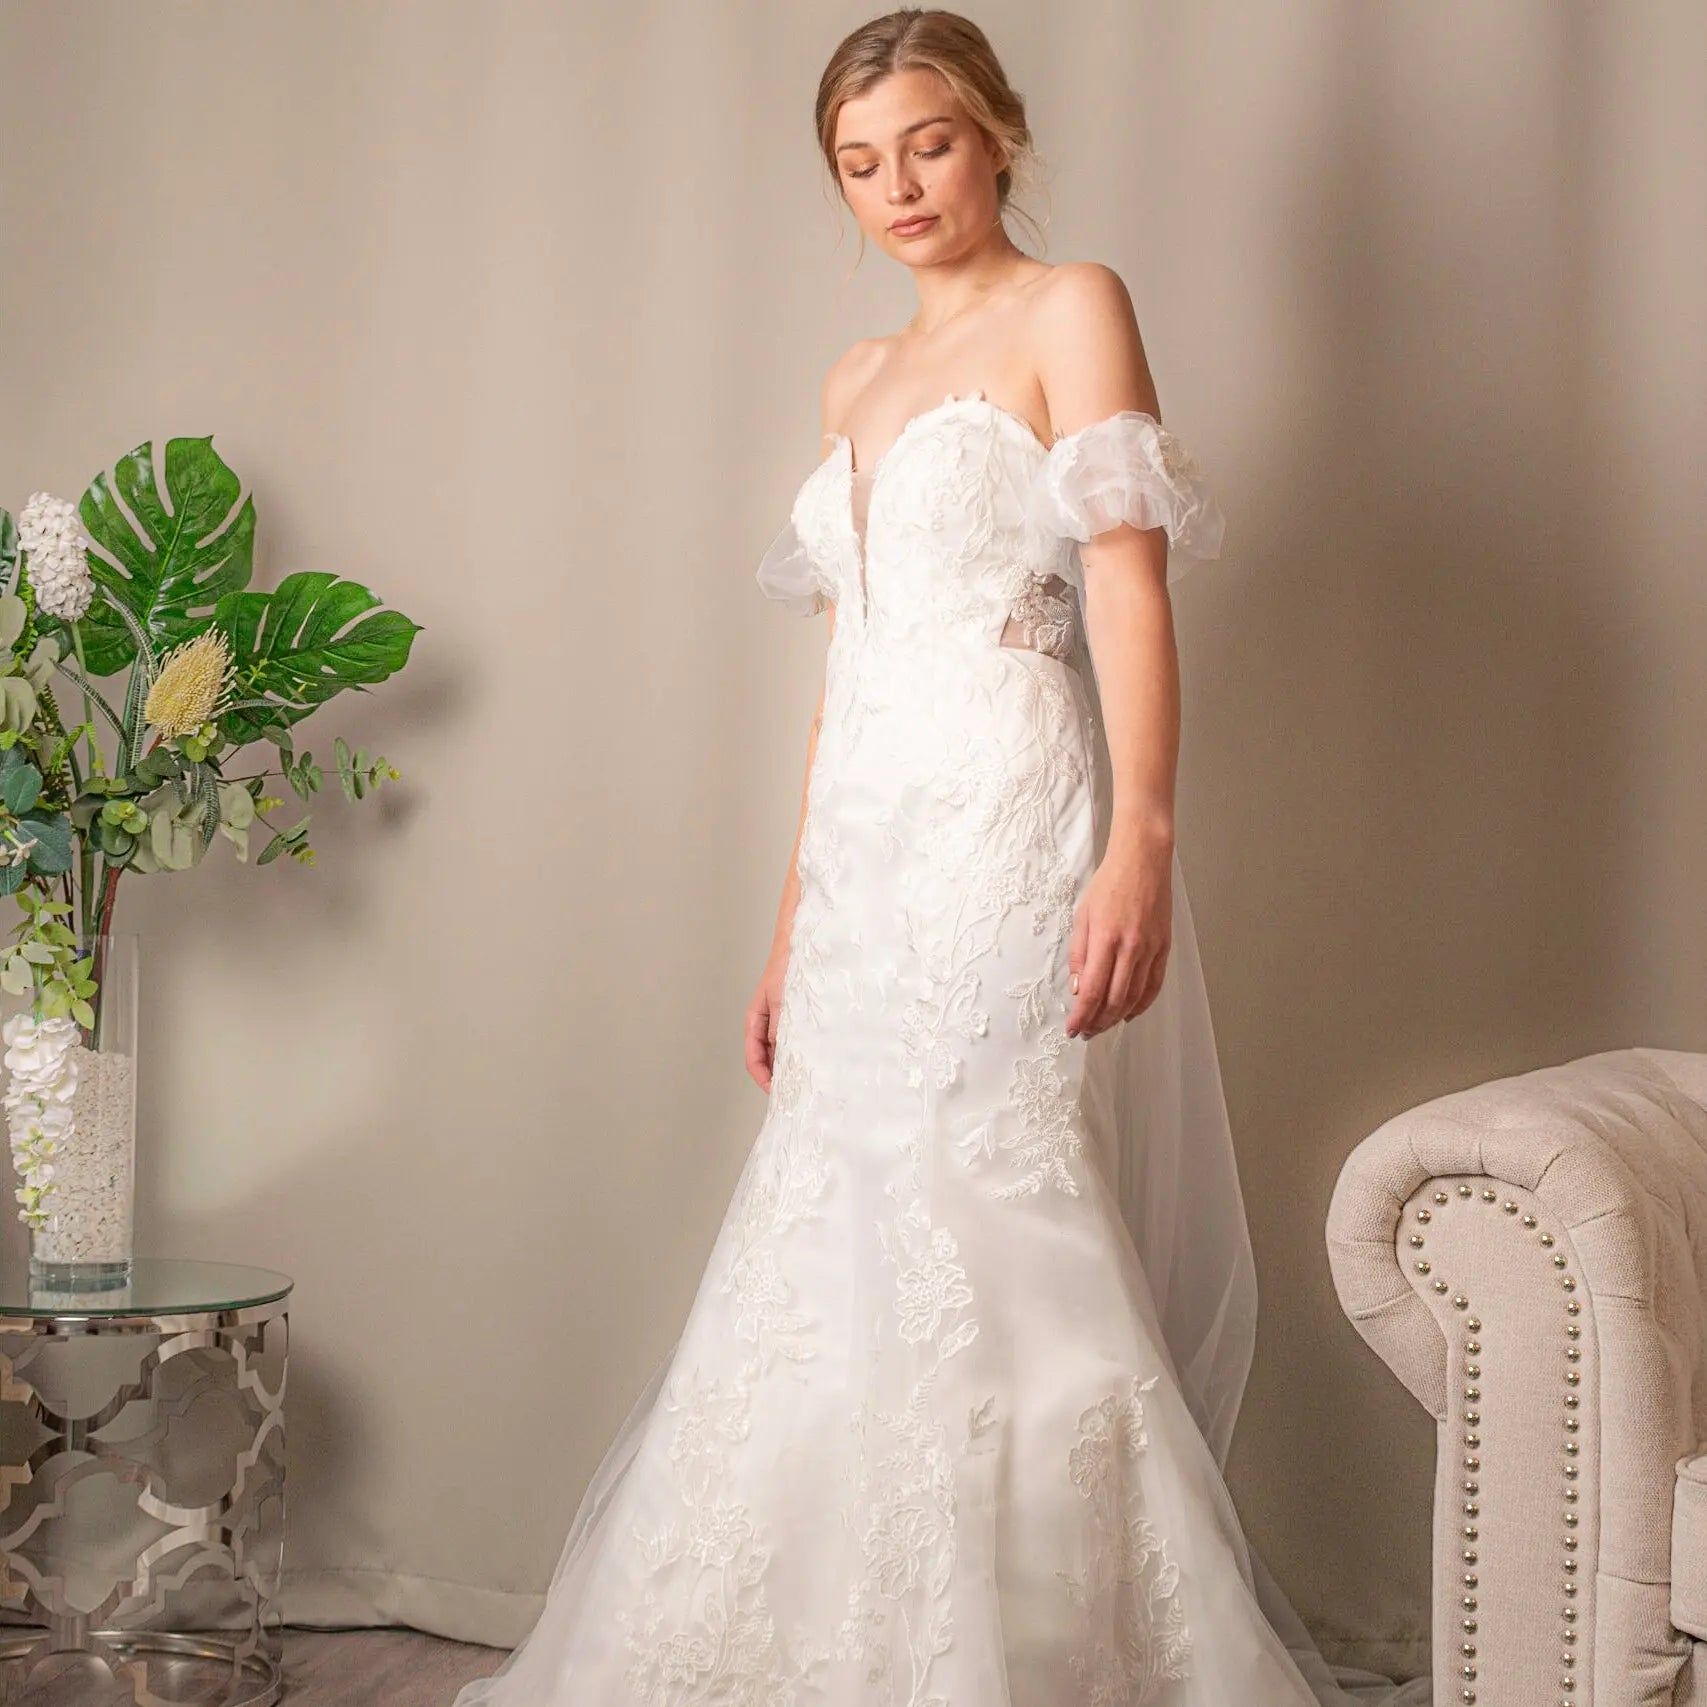 Catherine lace mermaid bridal gown with optional detachable tulle skirt from Divine Bridal.